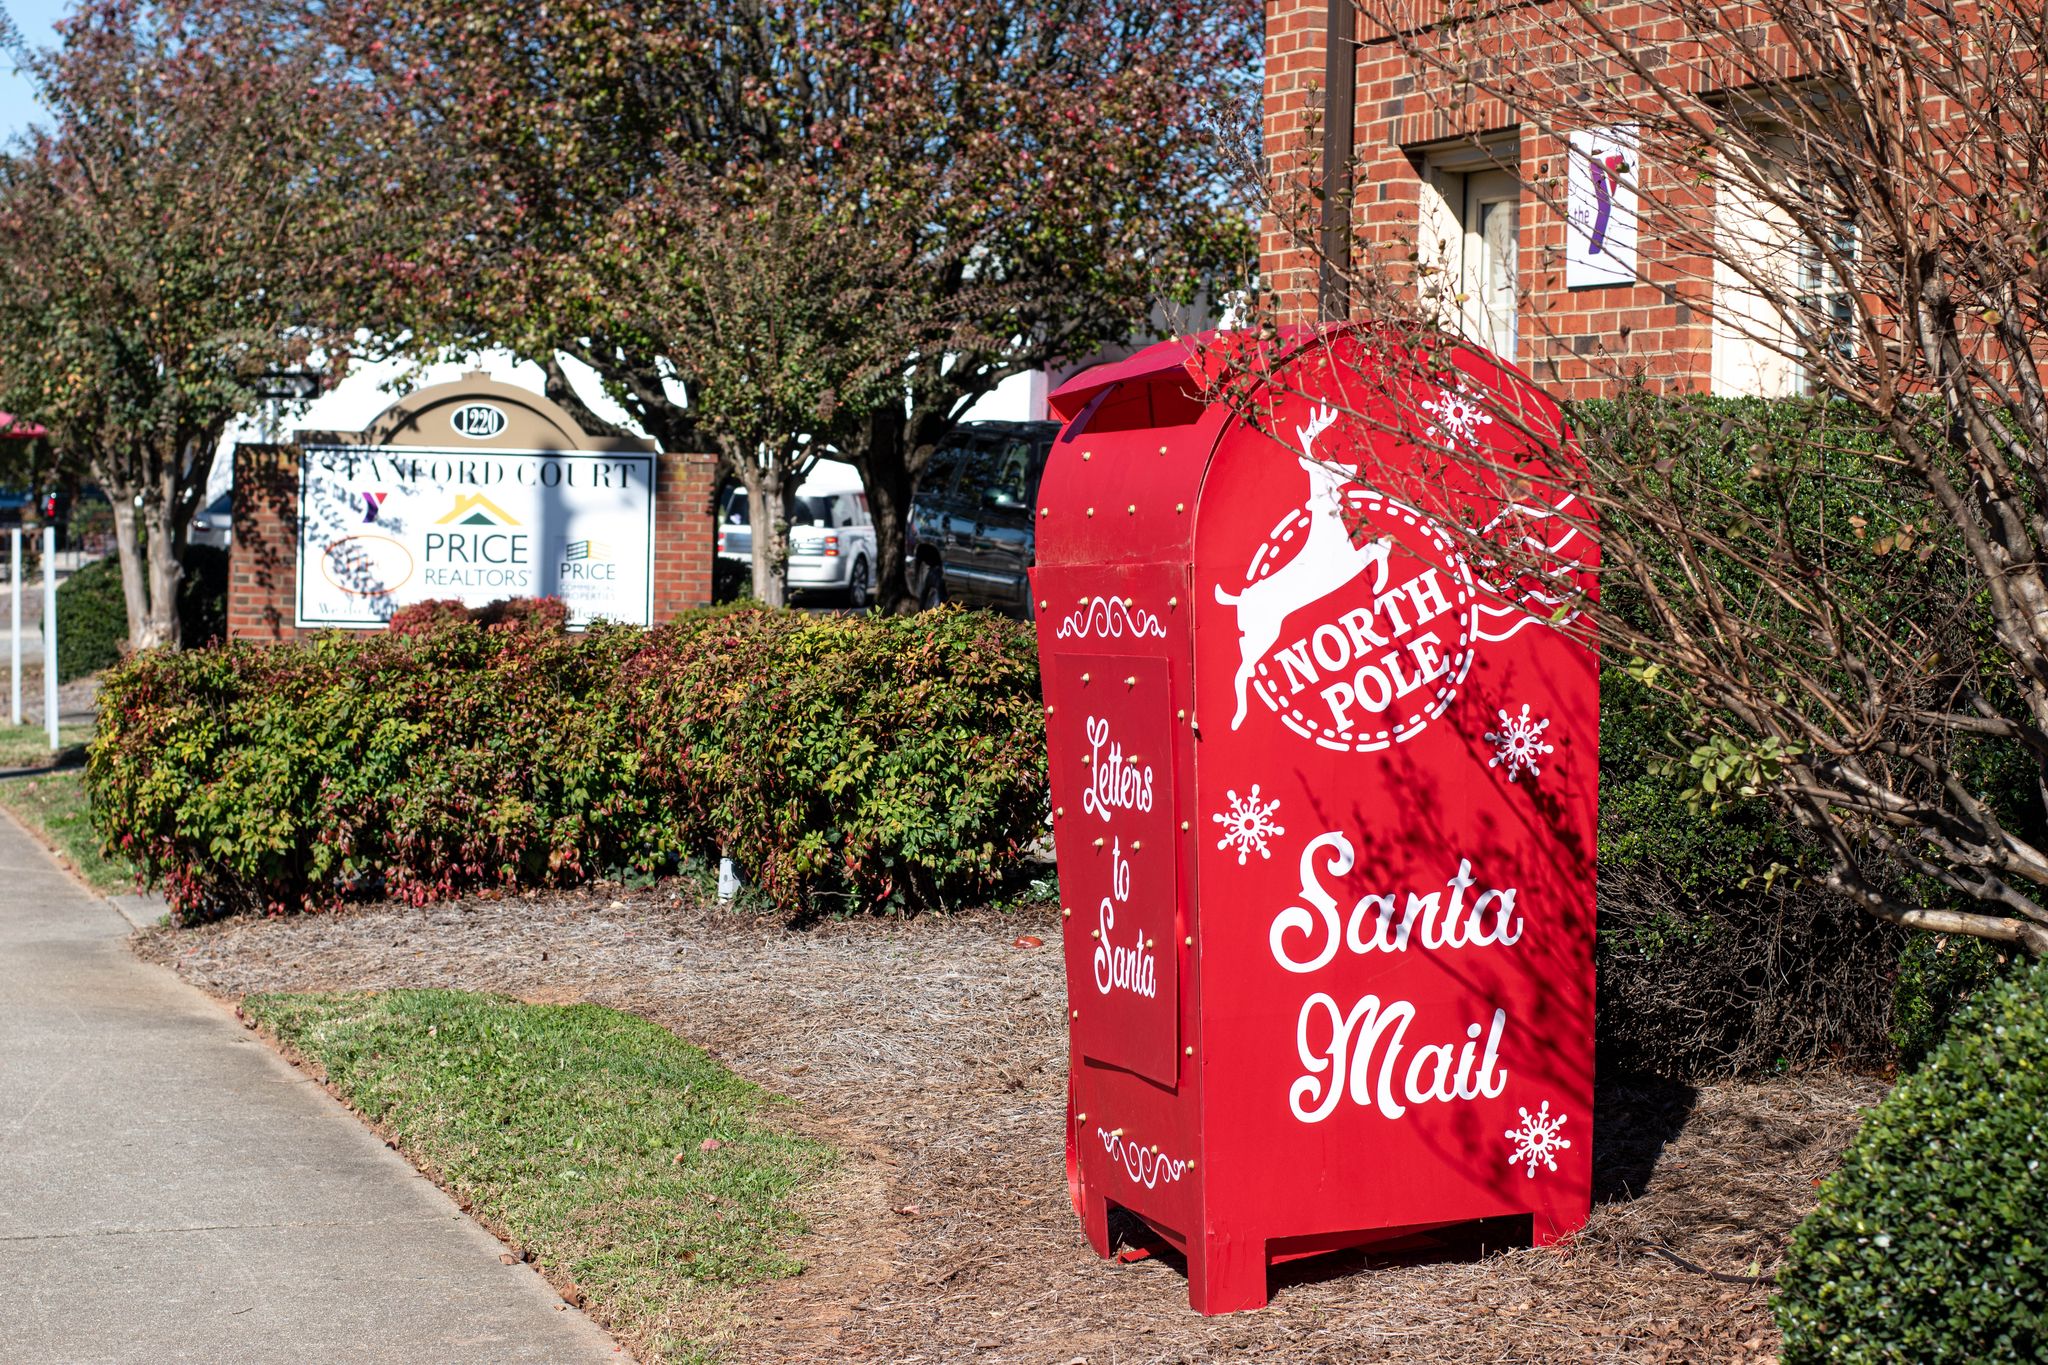 A red metal mailbox that says "North Pole: Santa Mail" on it, sitting in a patch of grass in front of Price Realtors.